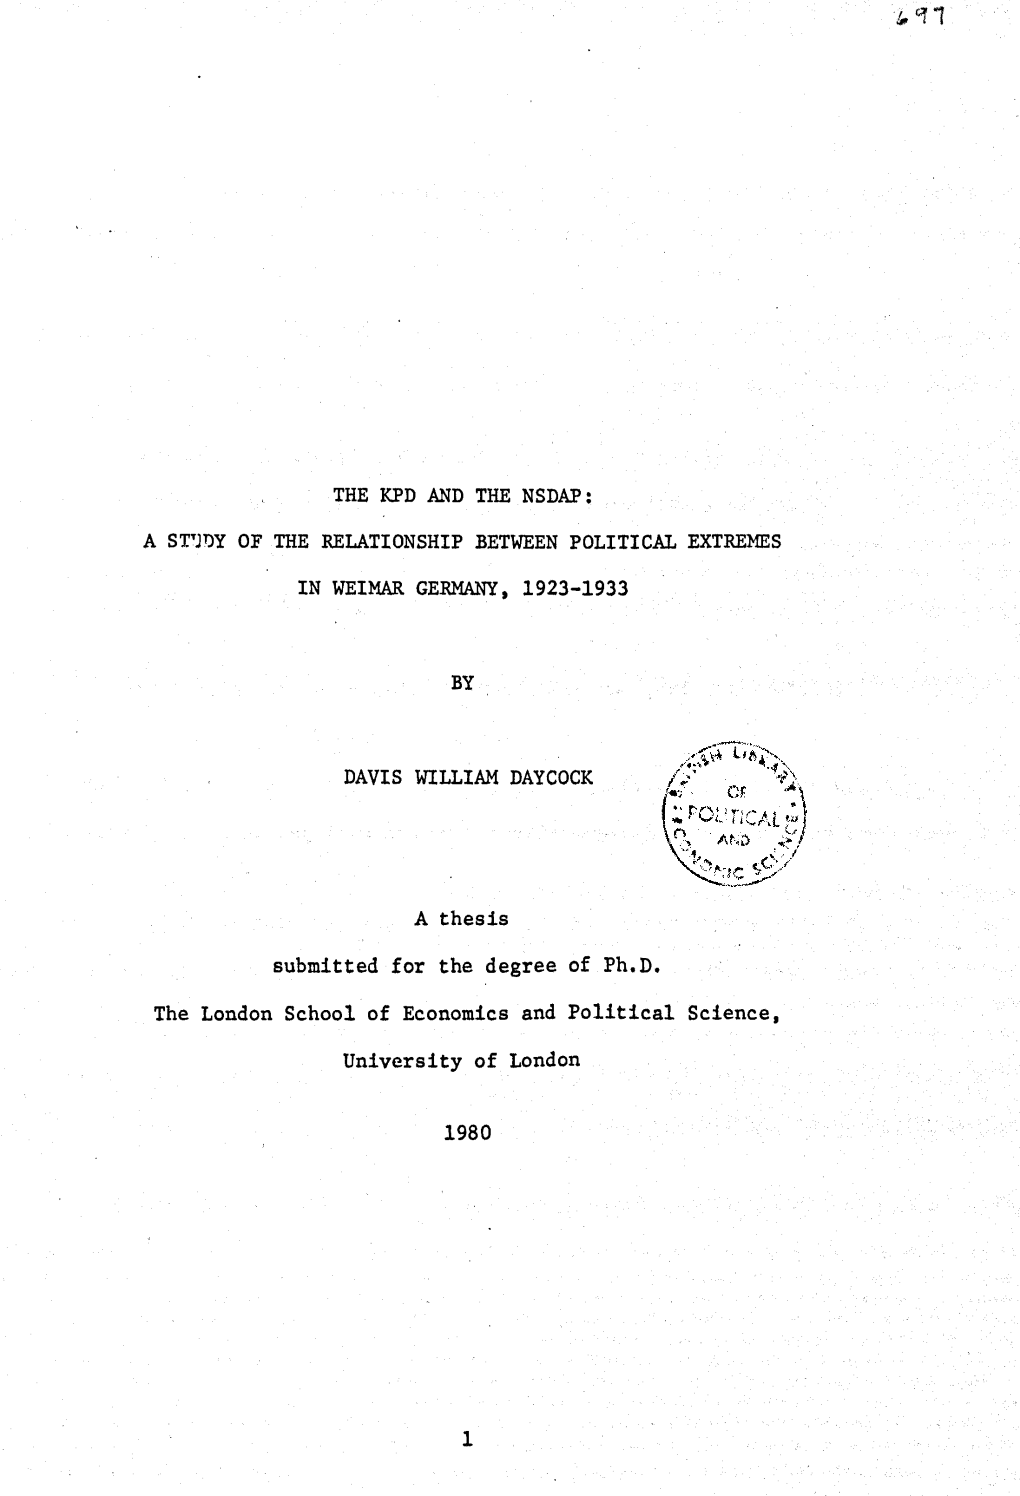 The Kpd and the Nsdap: a Sttjdy of the Relationship Between Political Extremes in Weimar Germany, 1923-1933 by Davis William